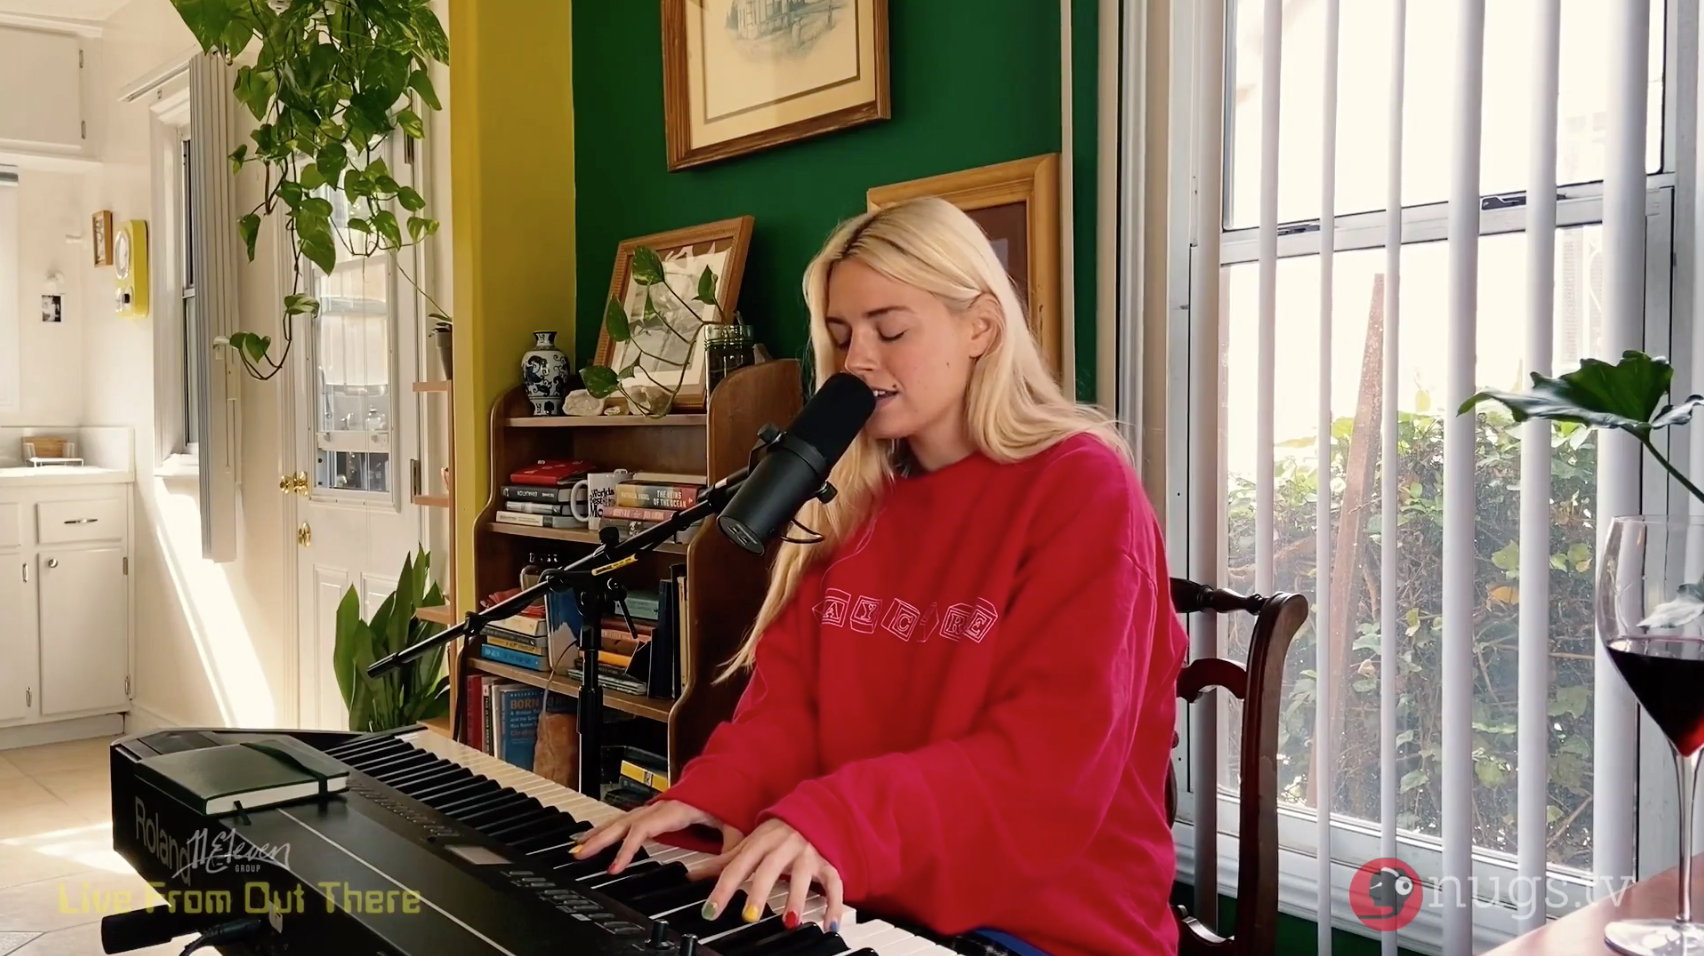 Ashe @ashemusic performing a special solo set right from her living room.